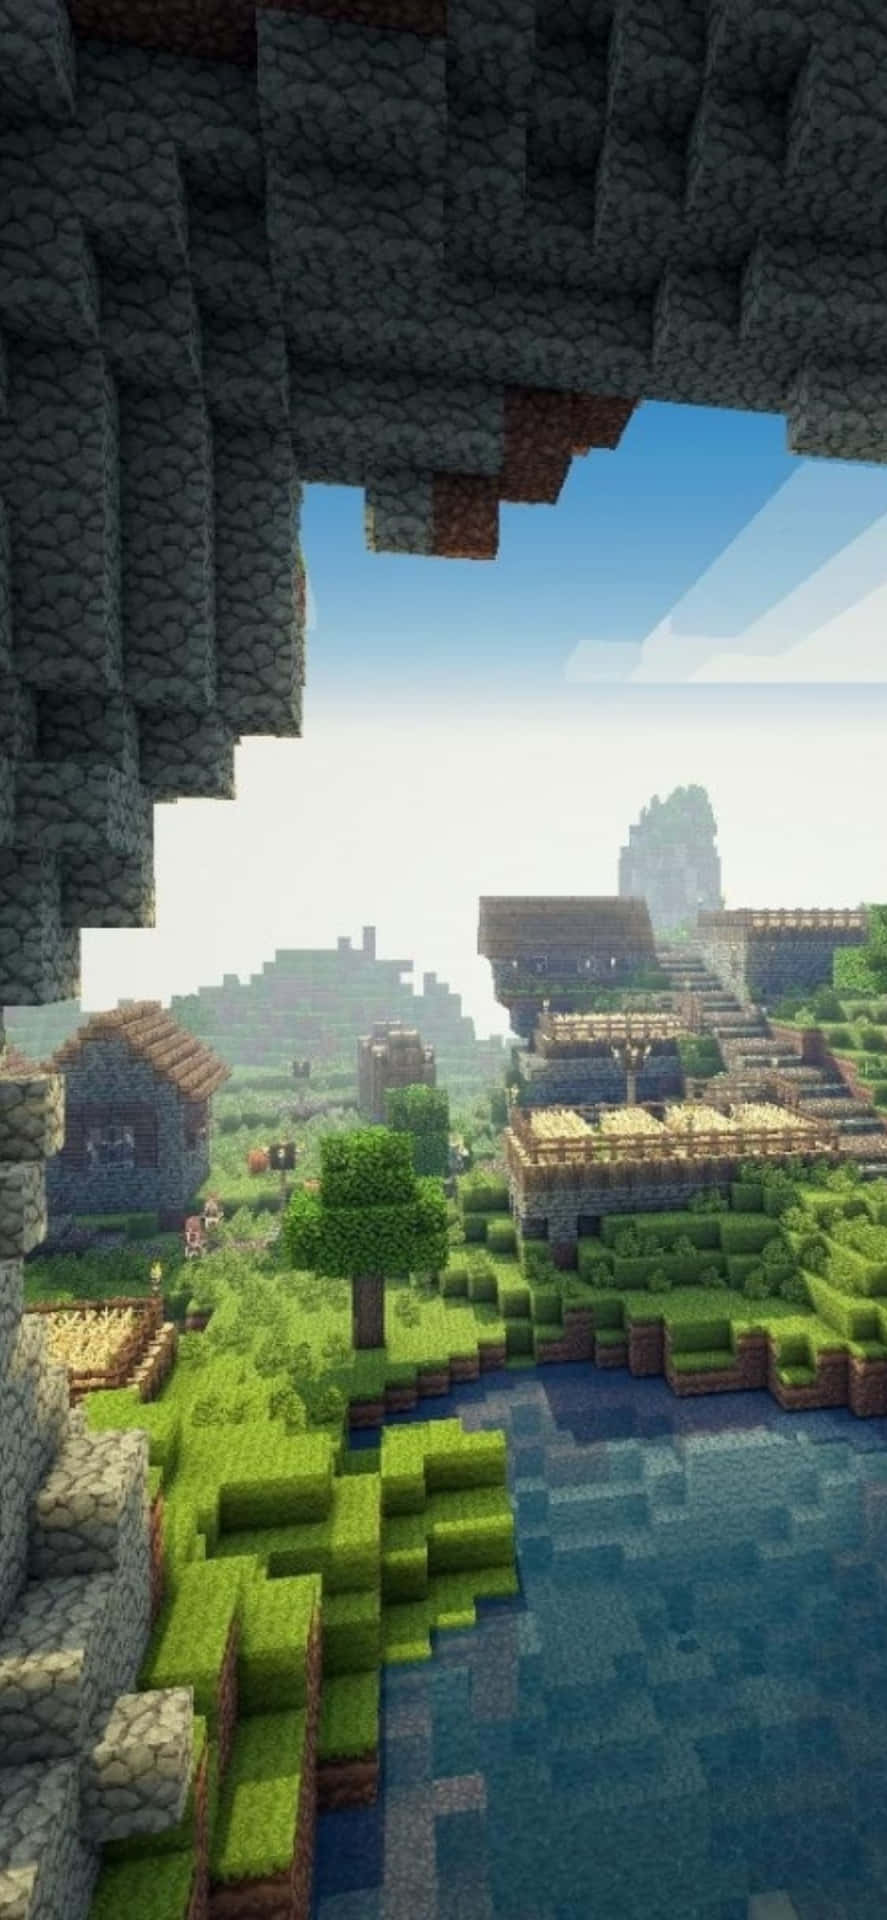 Explore the depths of Minecraft on your iPhone Xs